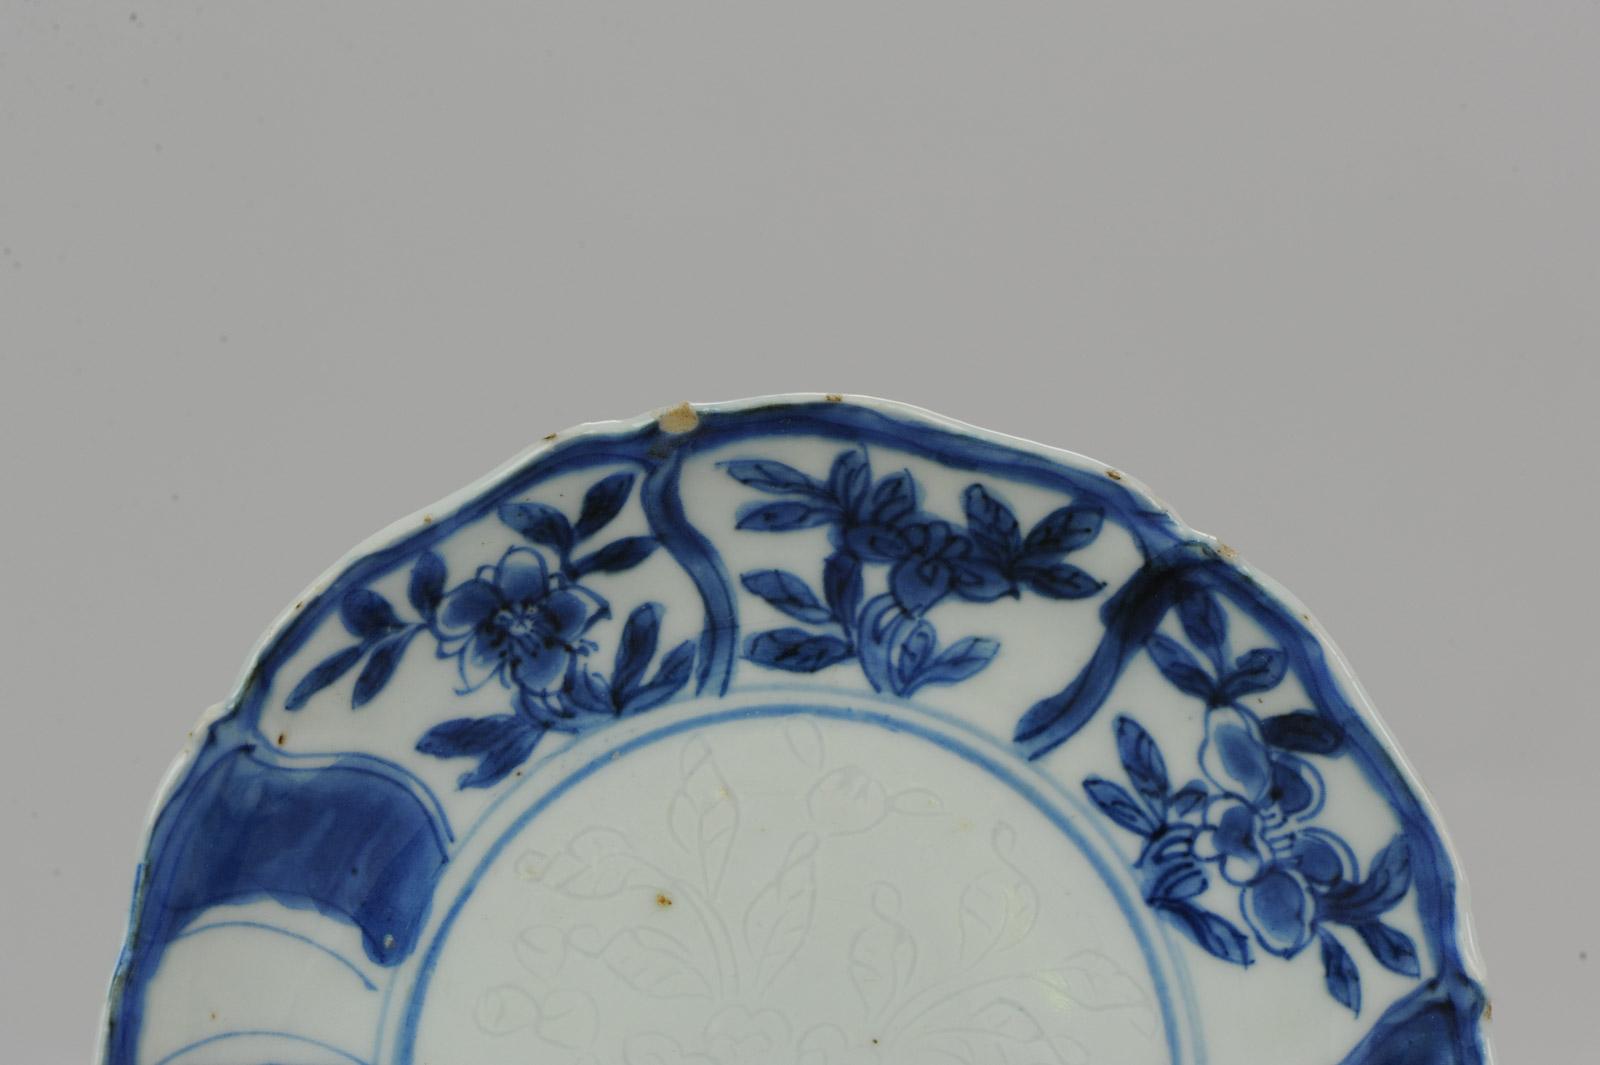 A Blue & White late ming / transitional plate with a nice and rare anhua decoration

Additional information:
Material: Porcelain & Pottery
Region of Origin: China
Period: 17th century Transitional (1620 - 1661)
Age: Pre-1800
Condition: Overall